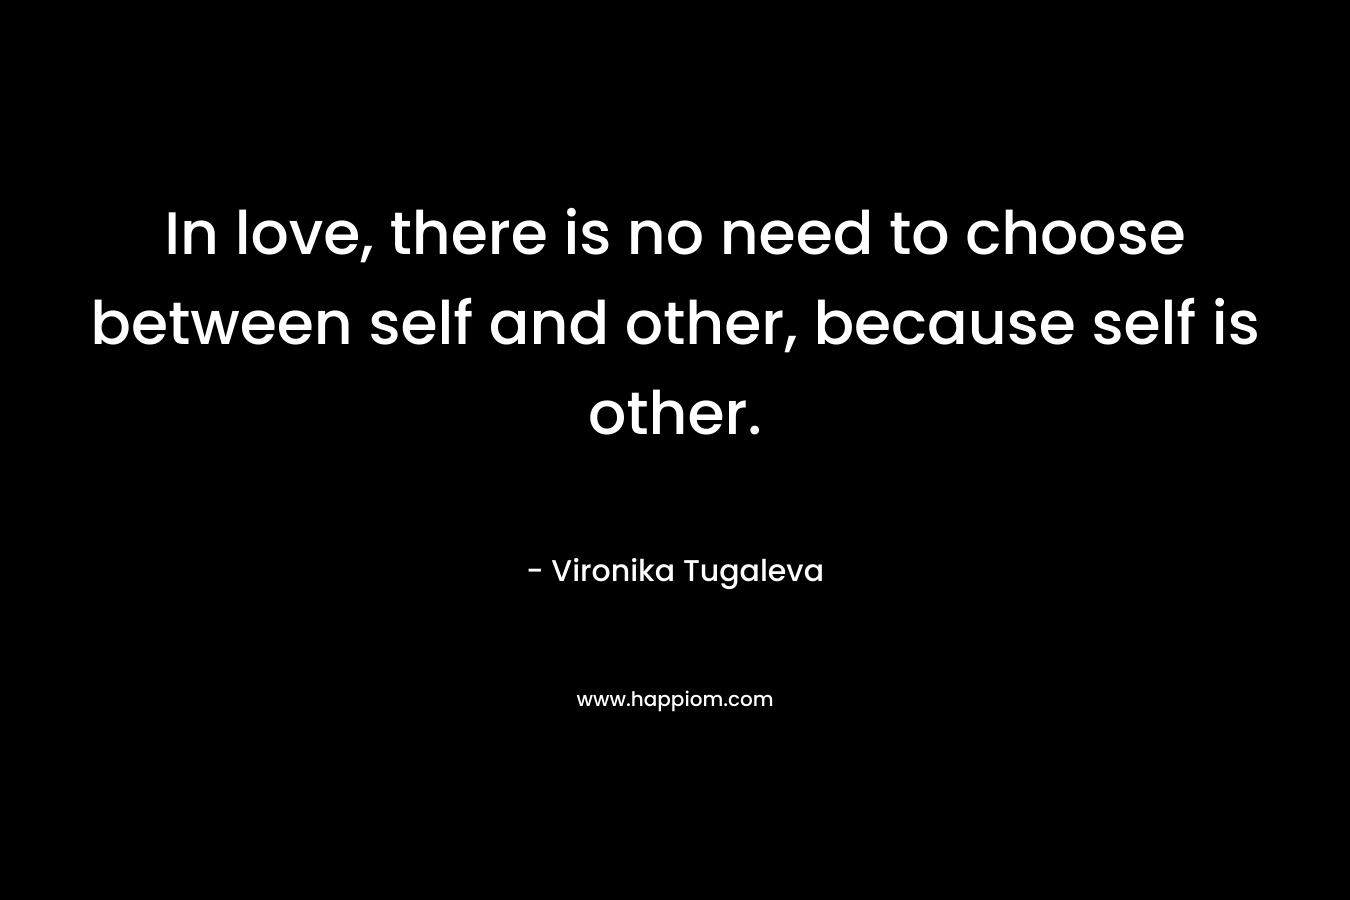 In love, there is no need to choose between self and other, because self is other.